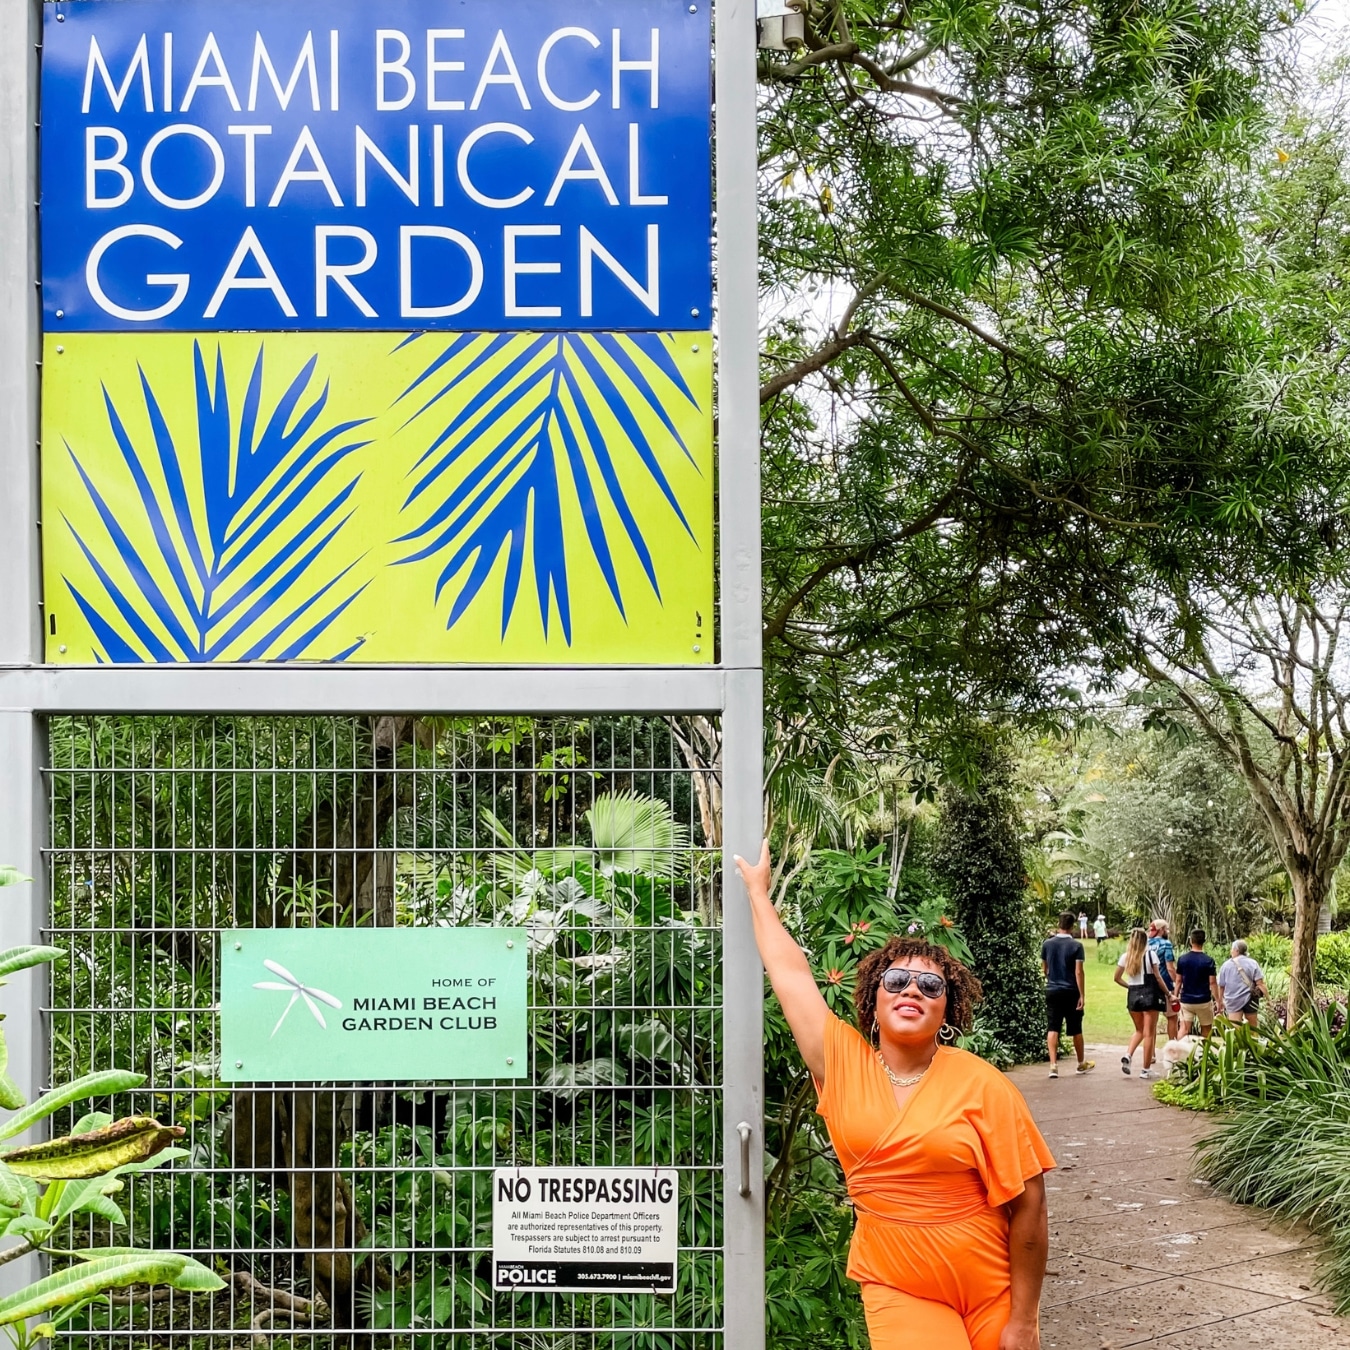 Me in front of the Miami Beach Botanical Garden sign. 